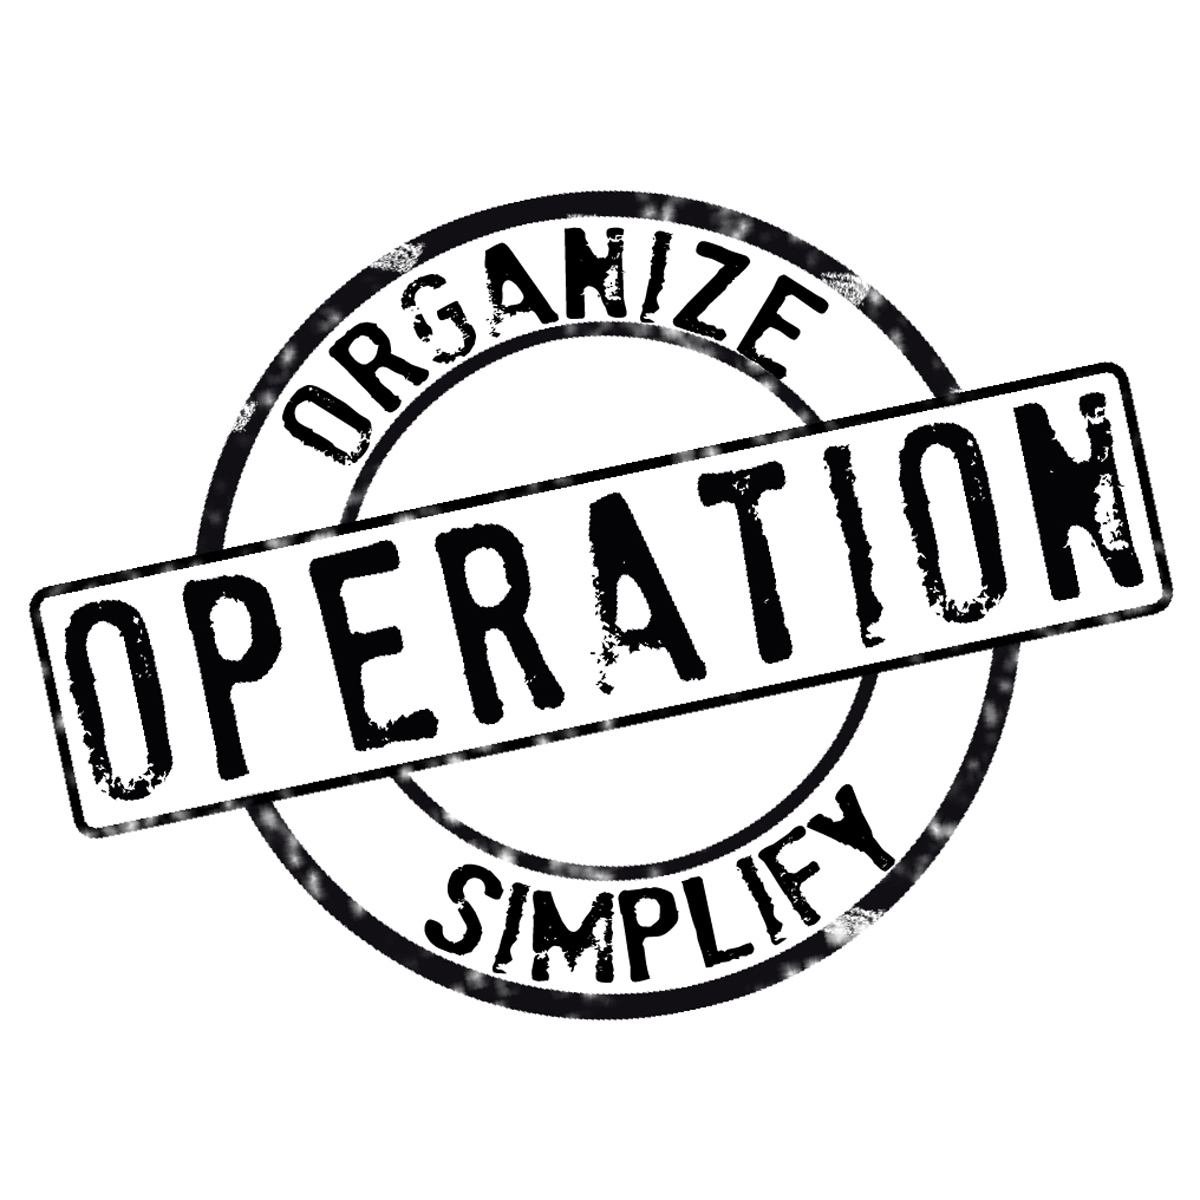 organize - définition - What is